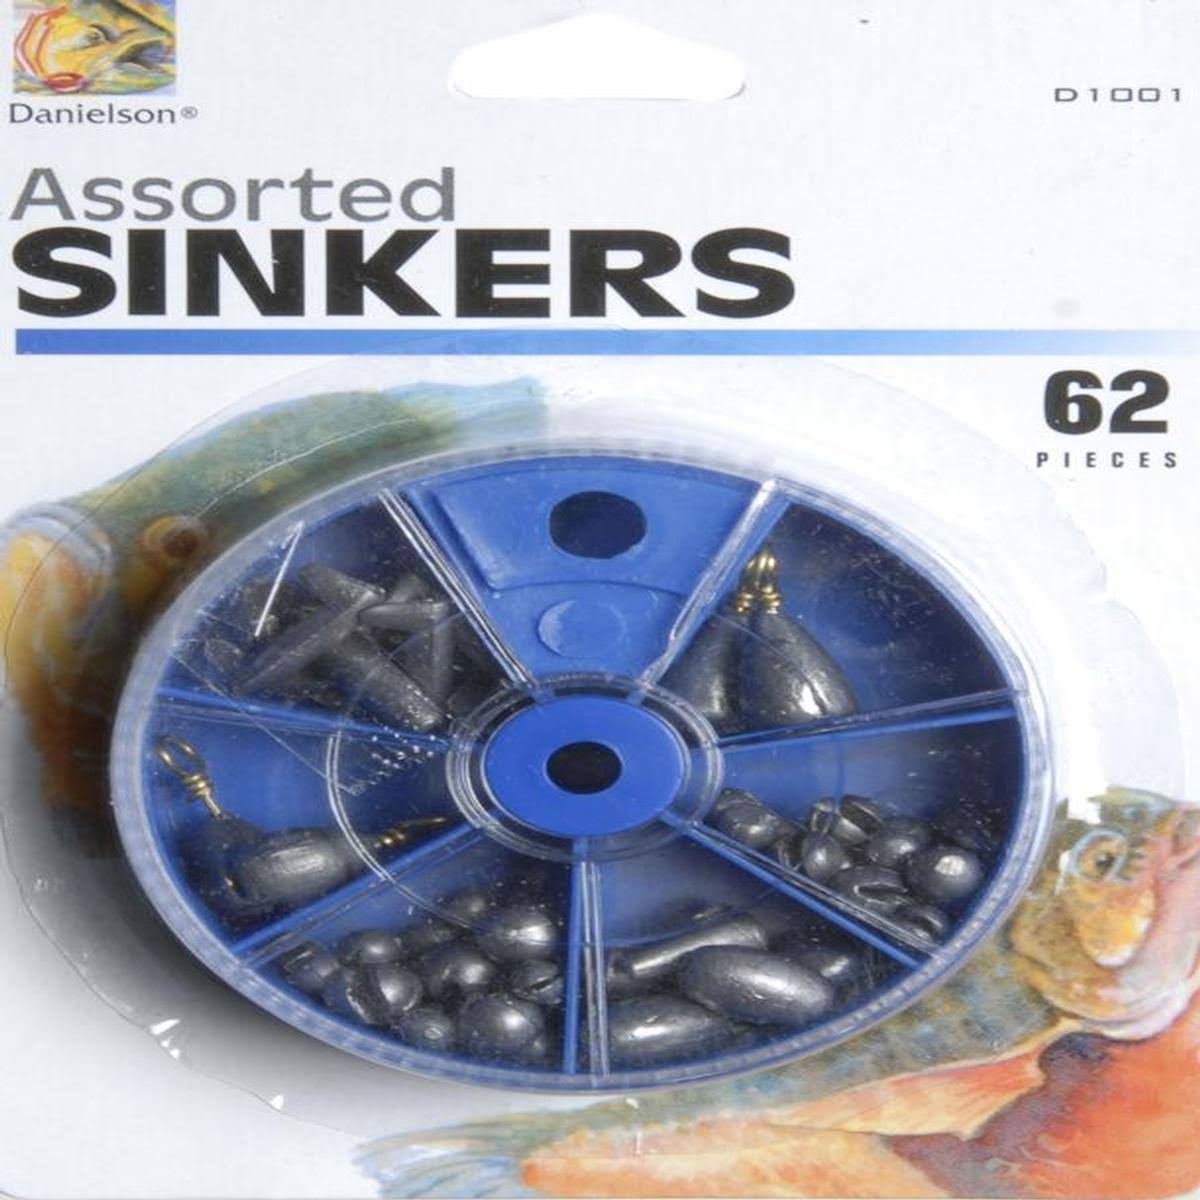 Danielson Assorted Sinkers - 62 Pieces